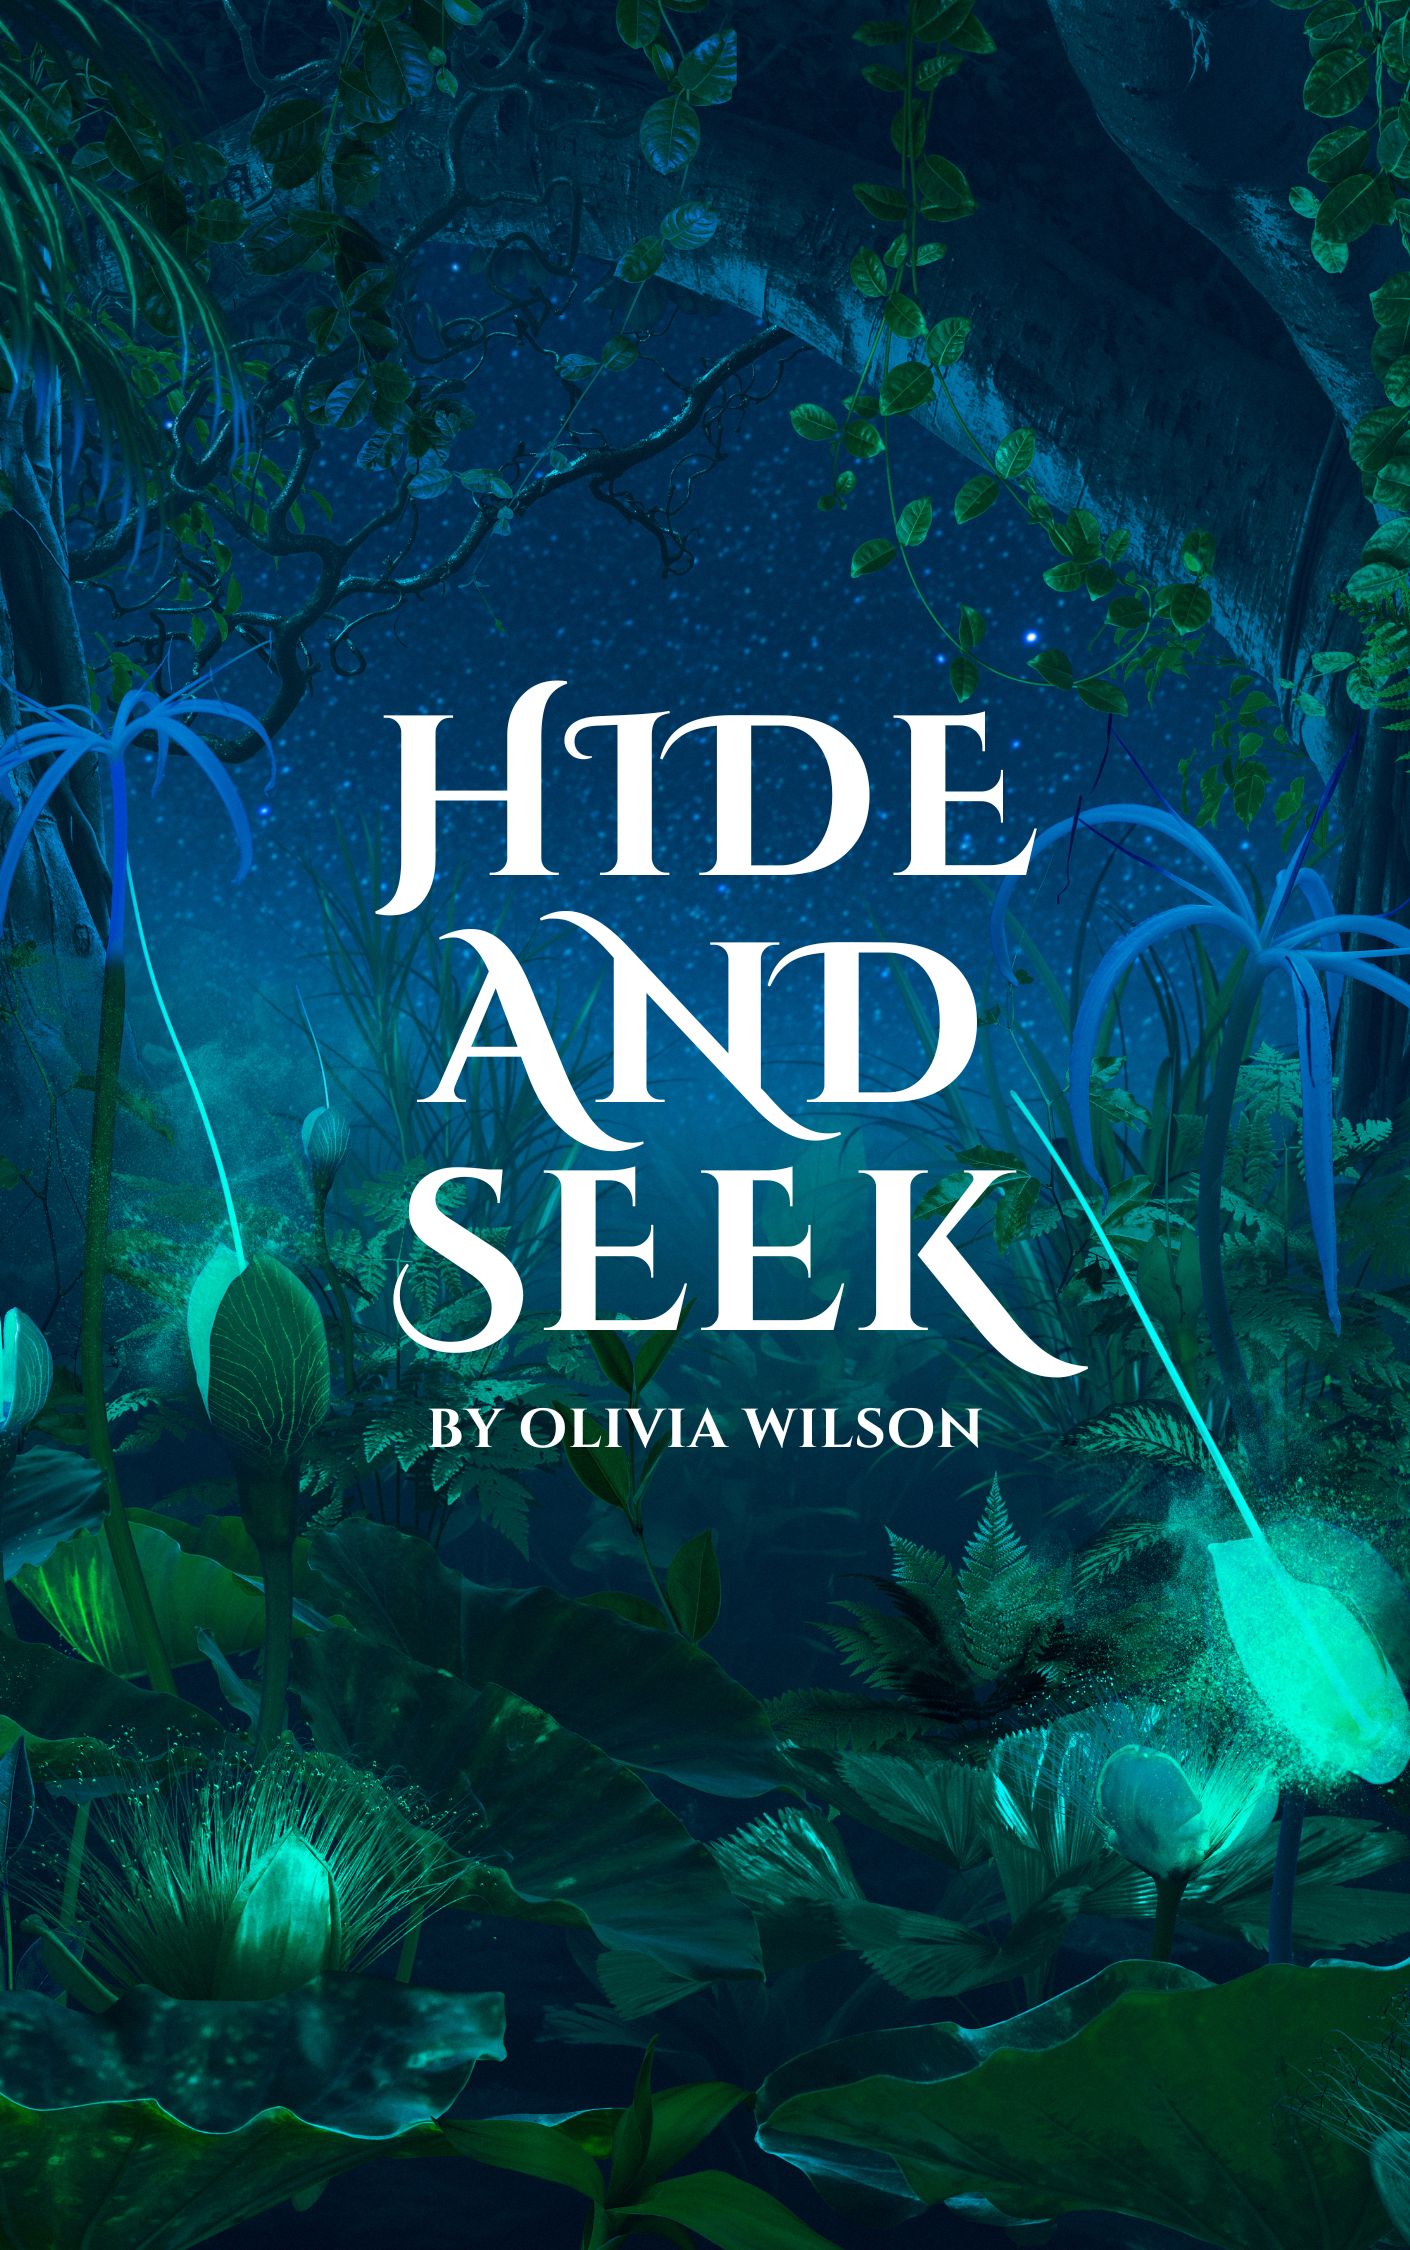 Hide and Seek by Olivia Wilson - A playful game of hide and seek, with children hiding behind trees and bushes in a sunny park